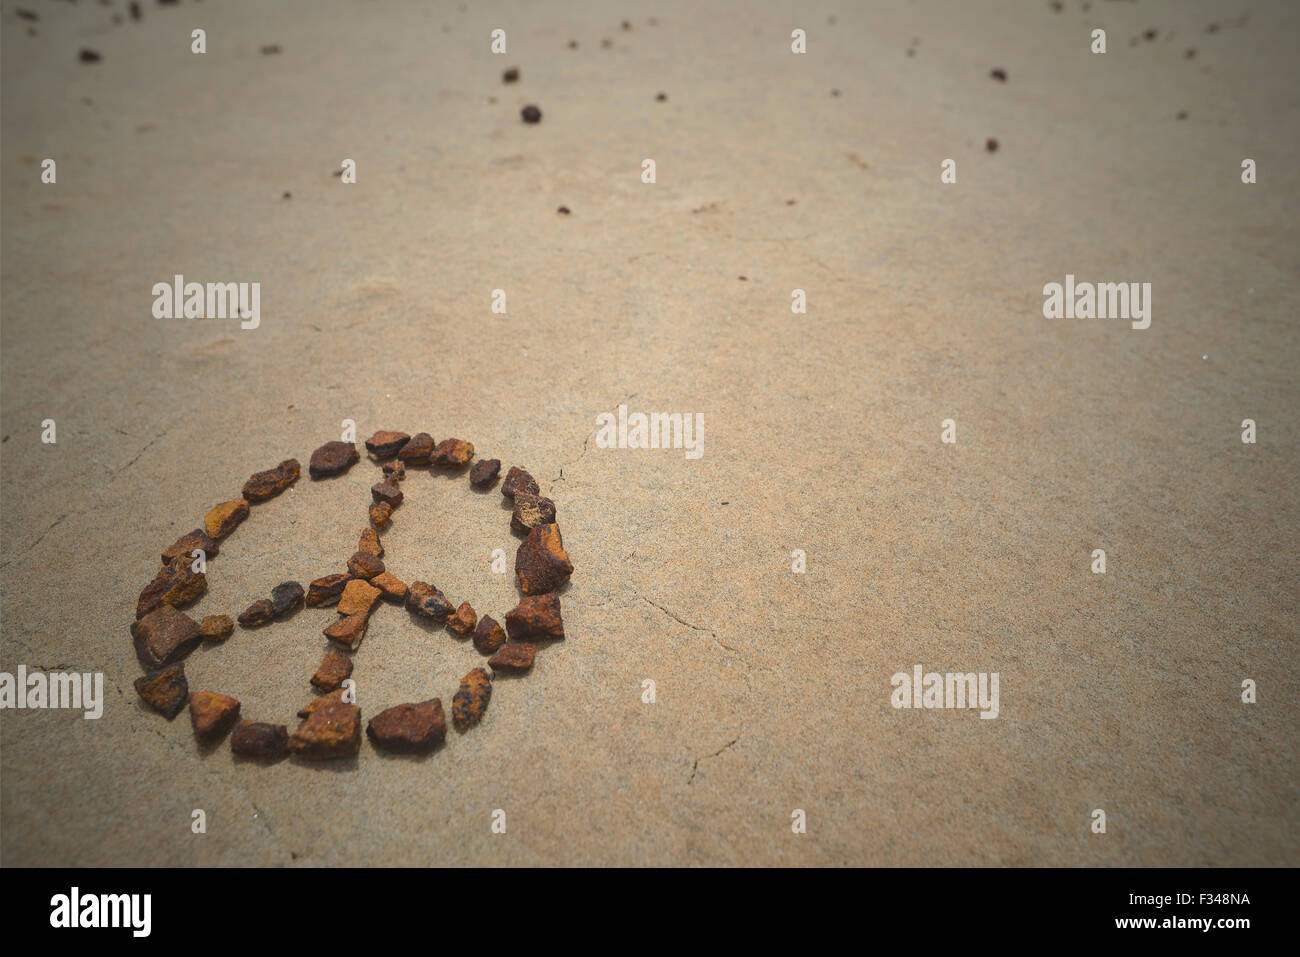 Peace symbol made with rocks on beach sand. Summer hipster background. Stock Photo